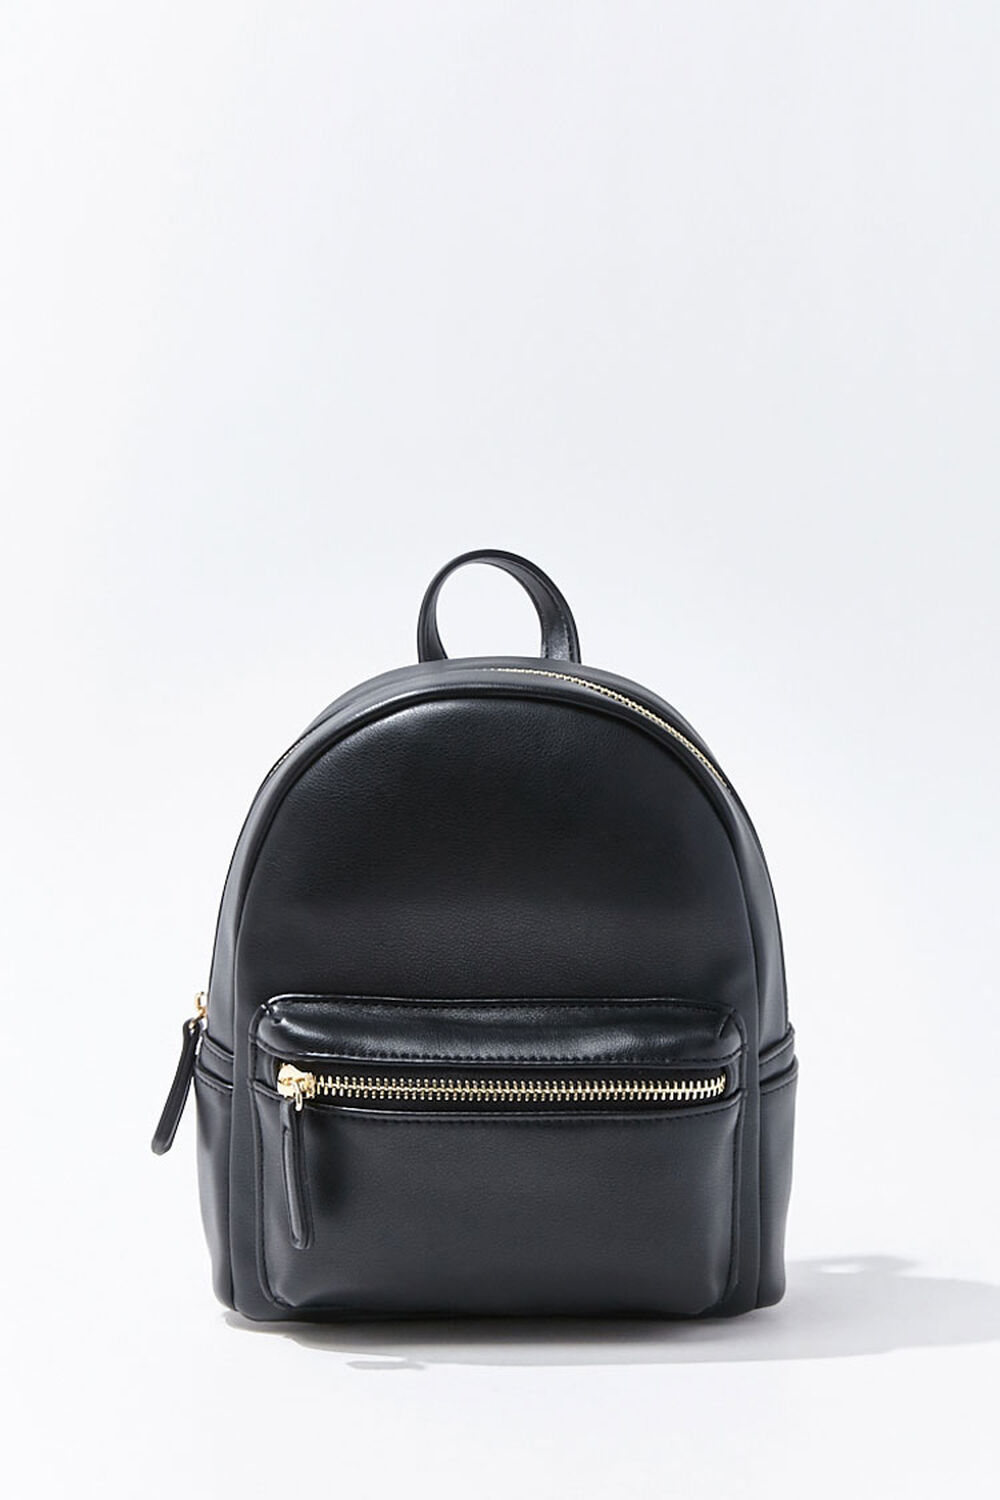 BLACK Small Faux Leather Backpack, image 1